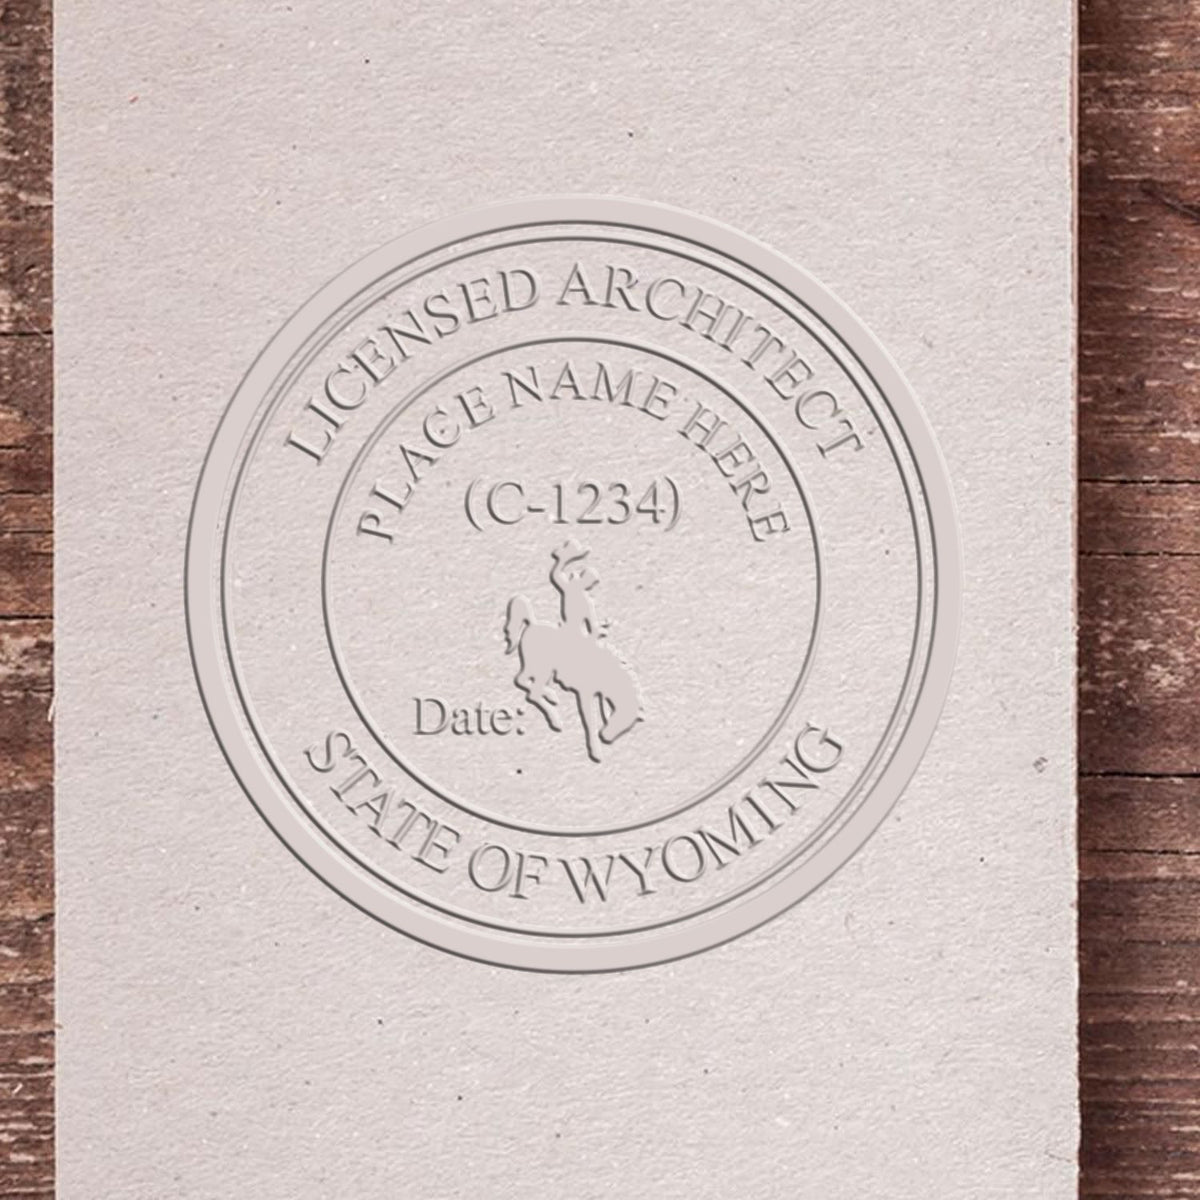 An alternative view of the State of Wyoming Long Reach Architectural Embossing Seal stamped on a sheet of paper showing the image in use